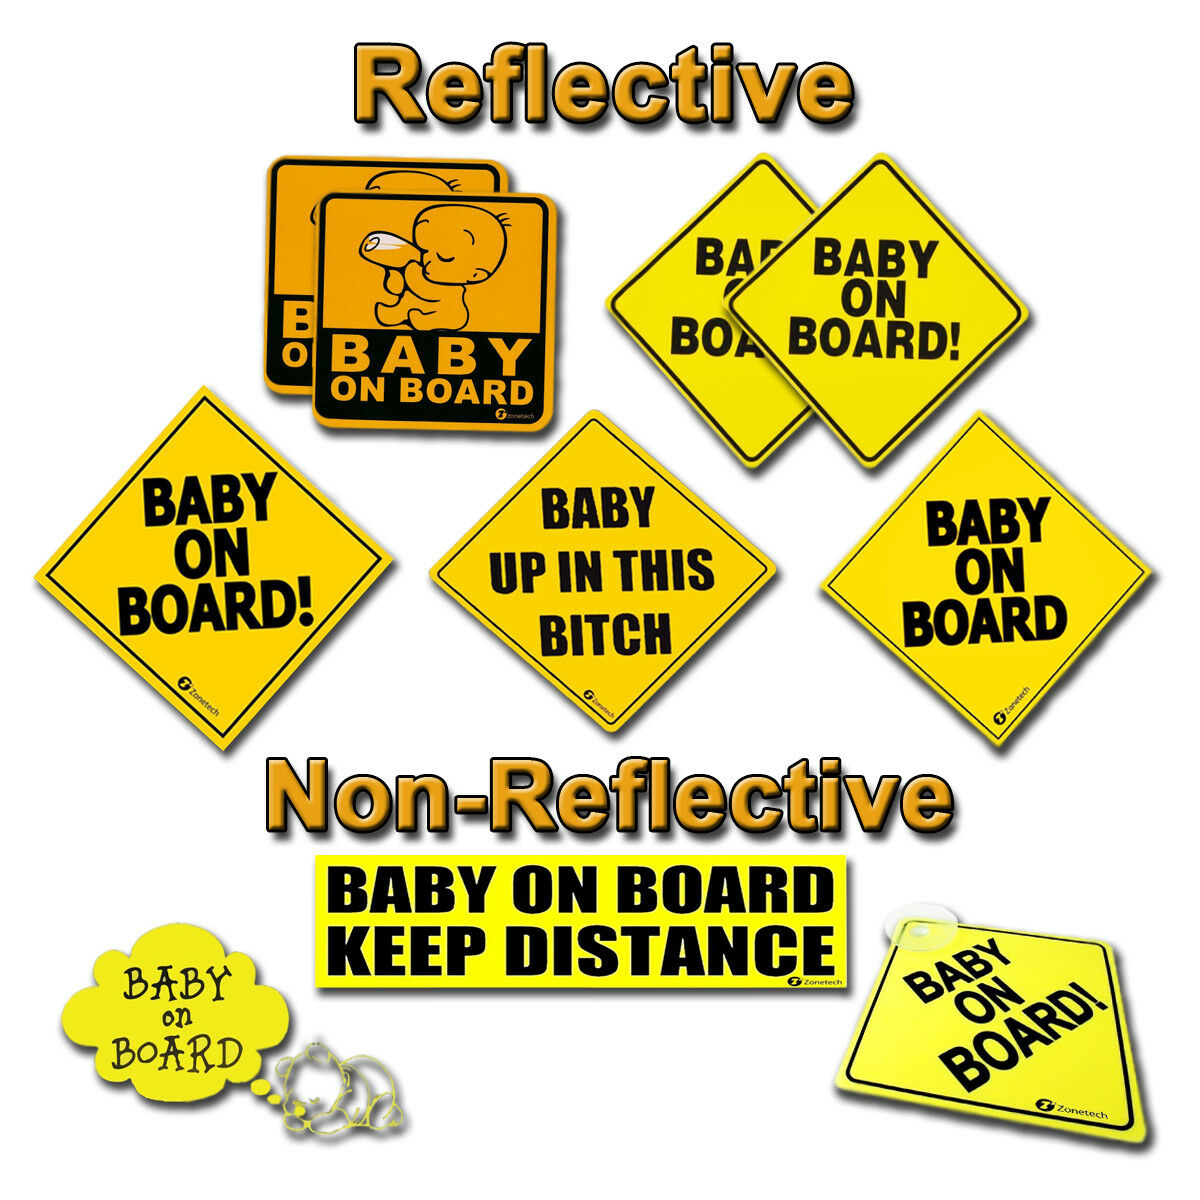 Zone Tech Baby On Board Car Safety Bumper Decal Magnet Reflective Warning Sign